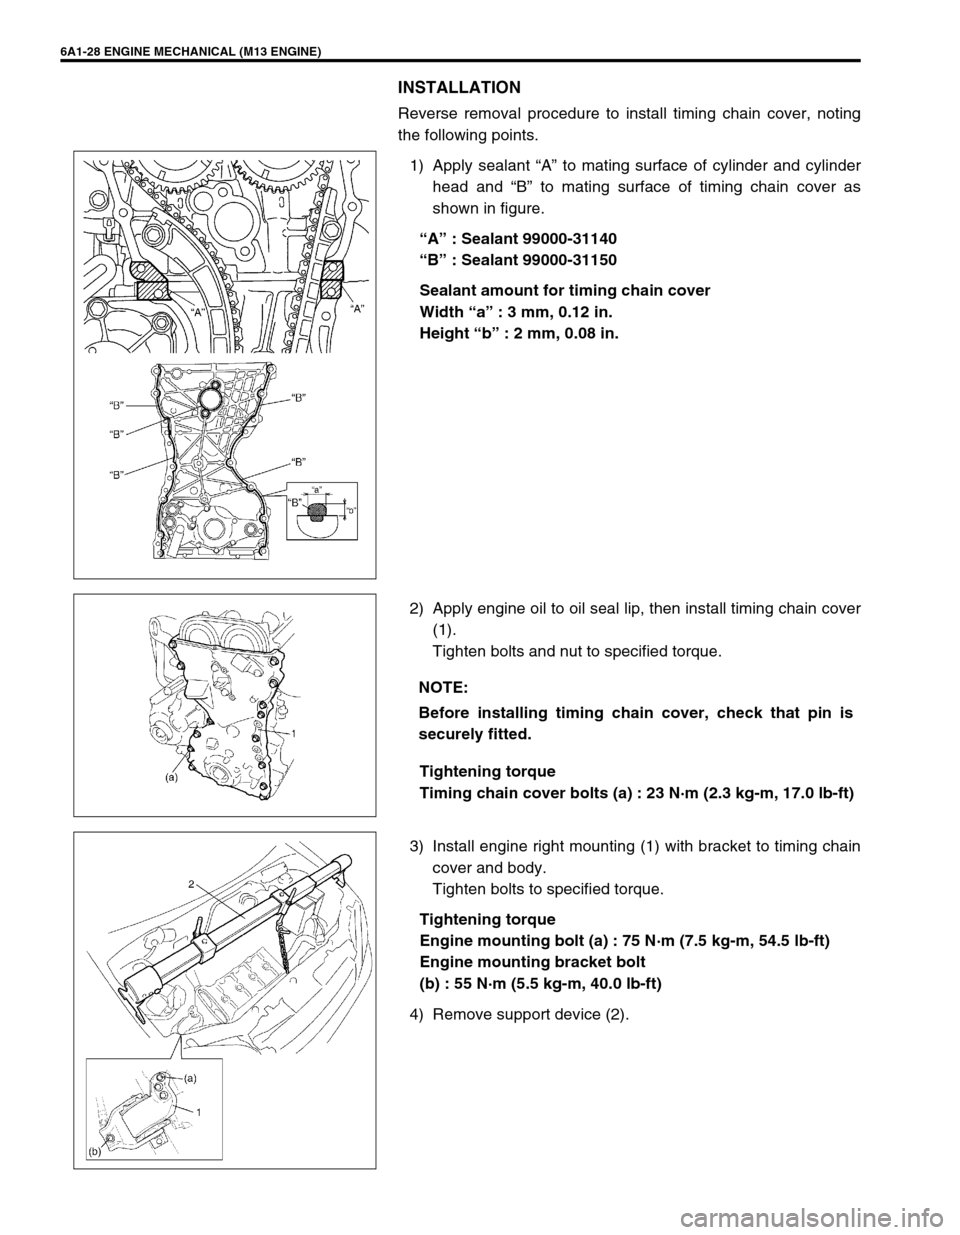 SUZUKI SWIFT 2000 1.G RG413 Service Workshop Manual 6A1-28 ENGINE MECHANICAL (M13 ENGINE)
INSTALLATION
Reverse removal procedure to install timing chain cover, noting
the following points.
1) Apply sealant “A” to mating surface of cylinder and cyli